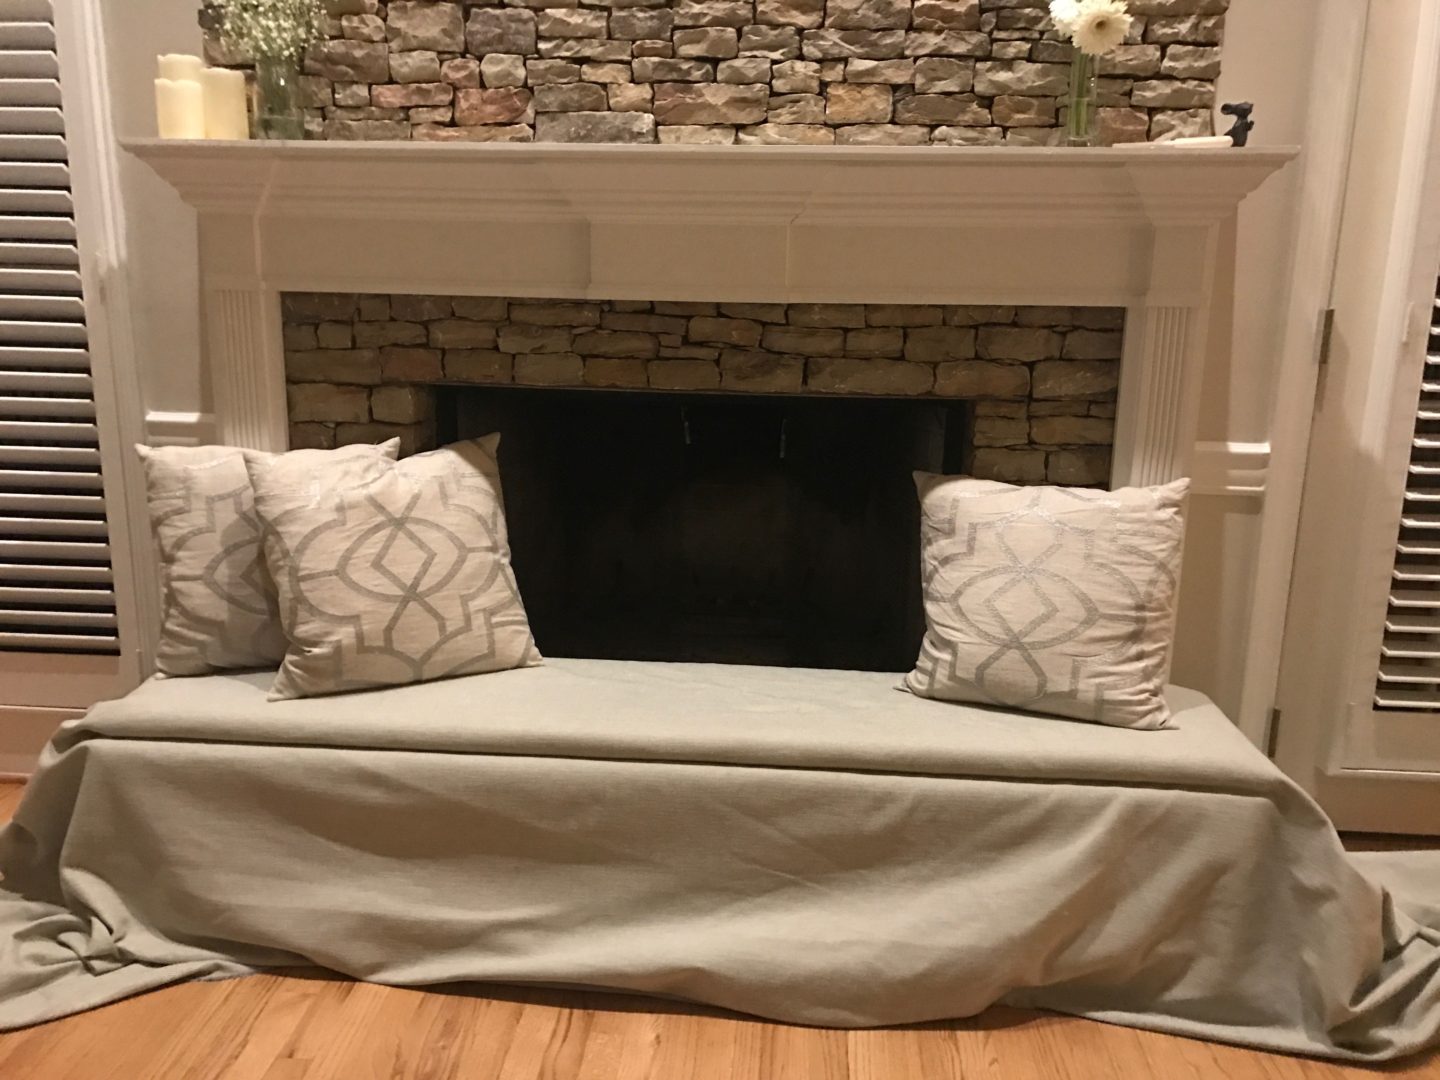 How to Baby Proof a Fireplace (Step-By-Step Guide)